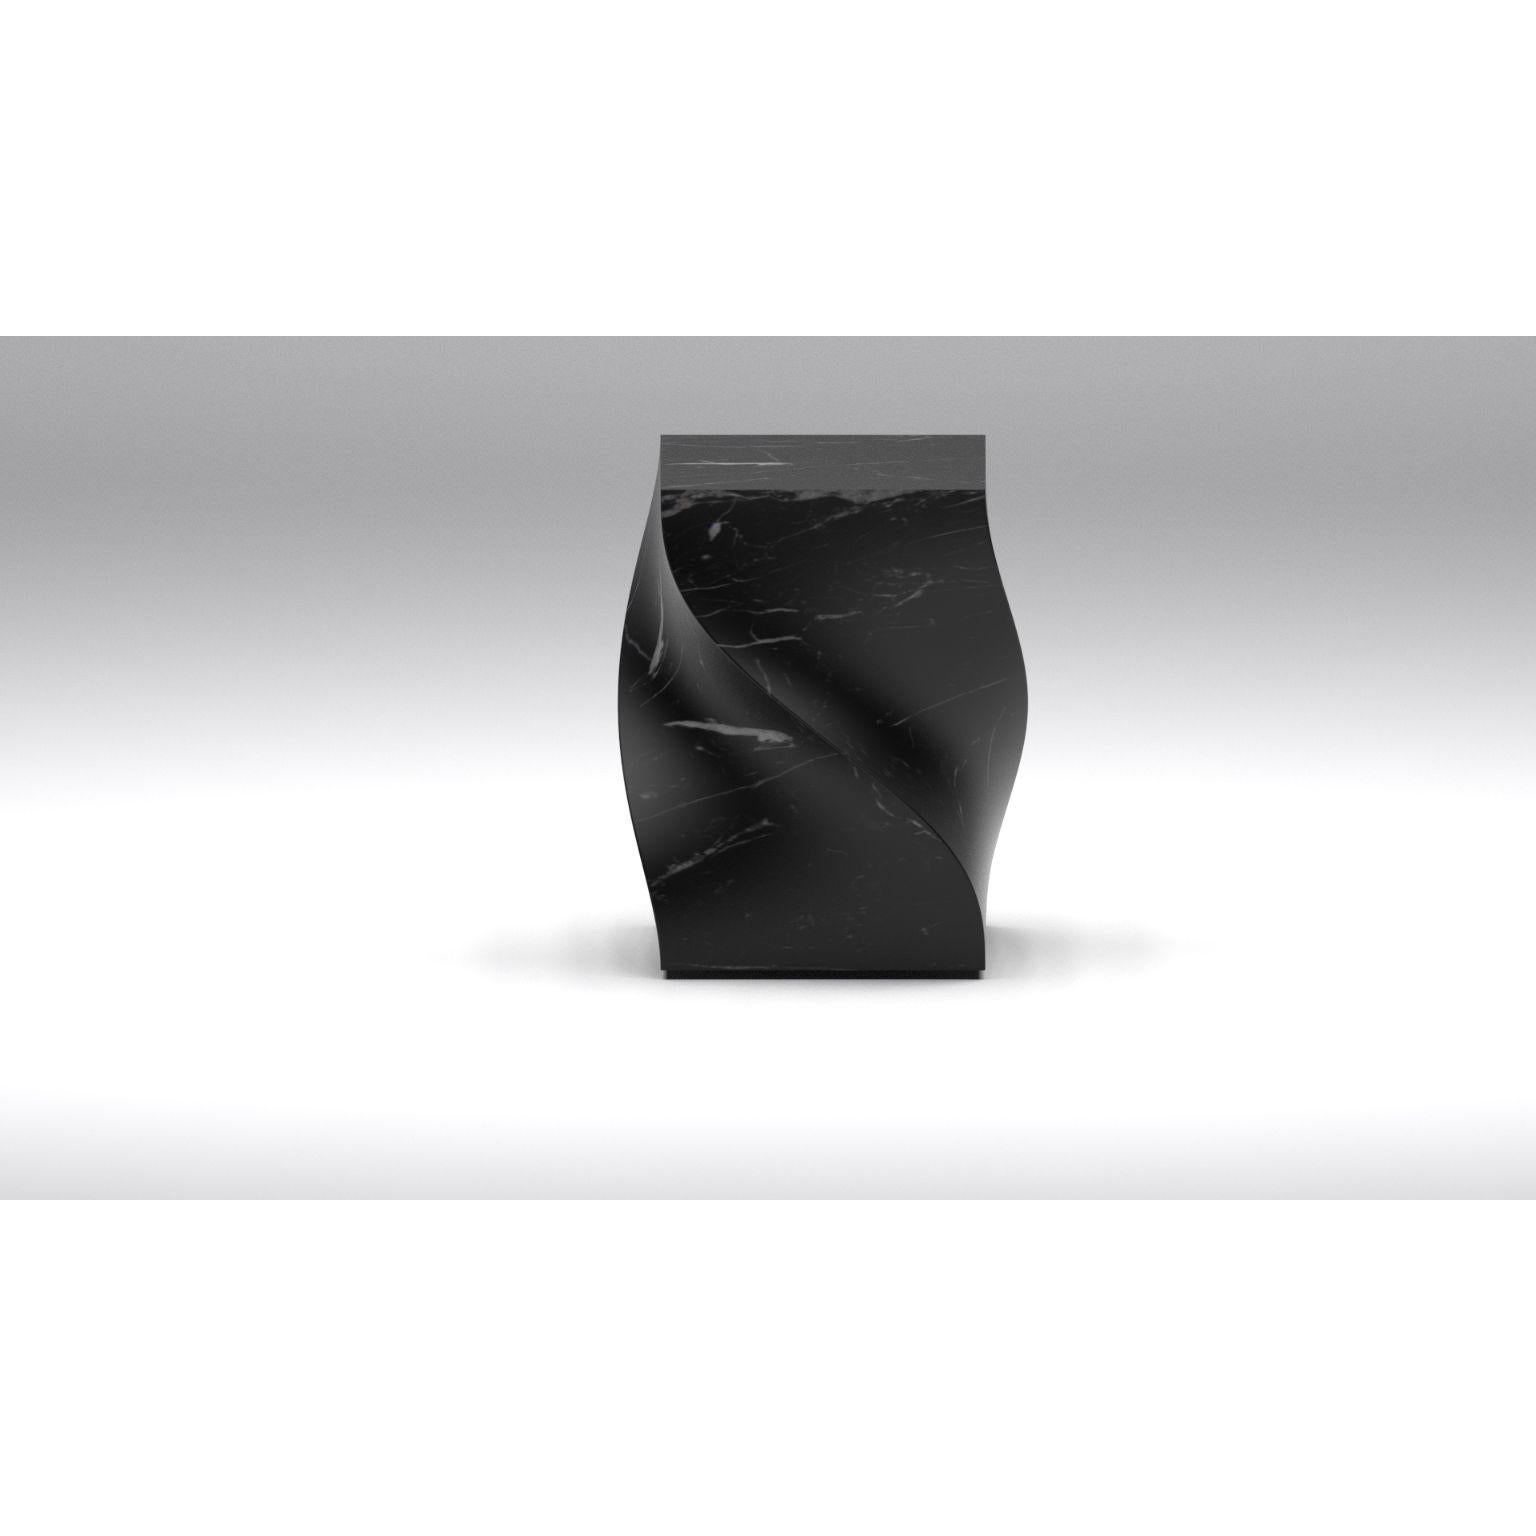 Contemporary Soul Sculpture Black Pull up Table by Veronica Mar